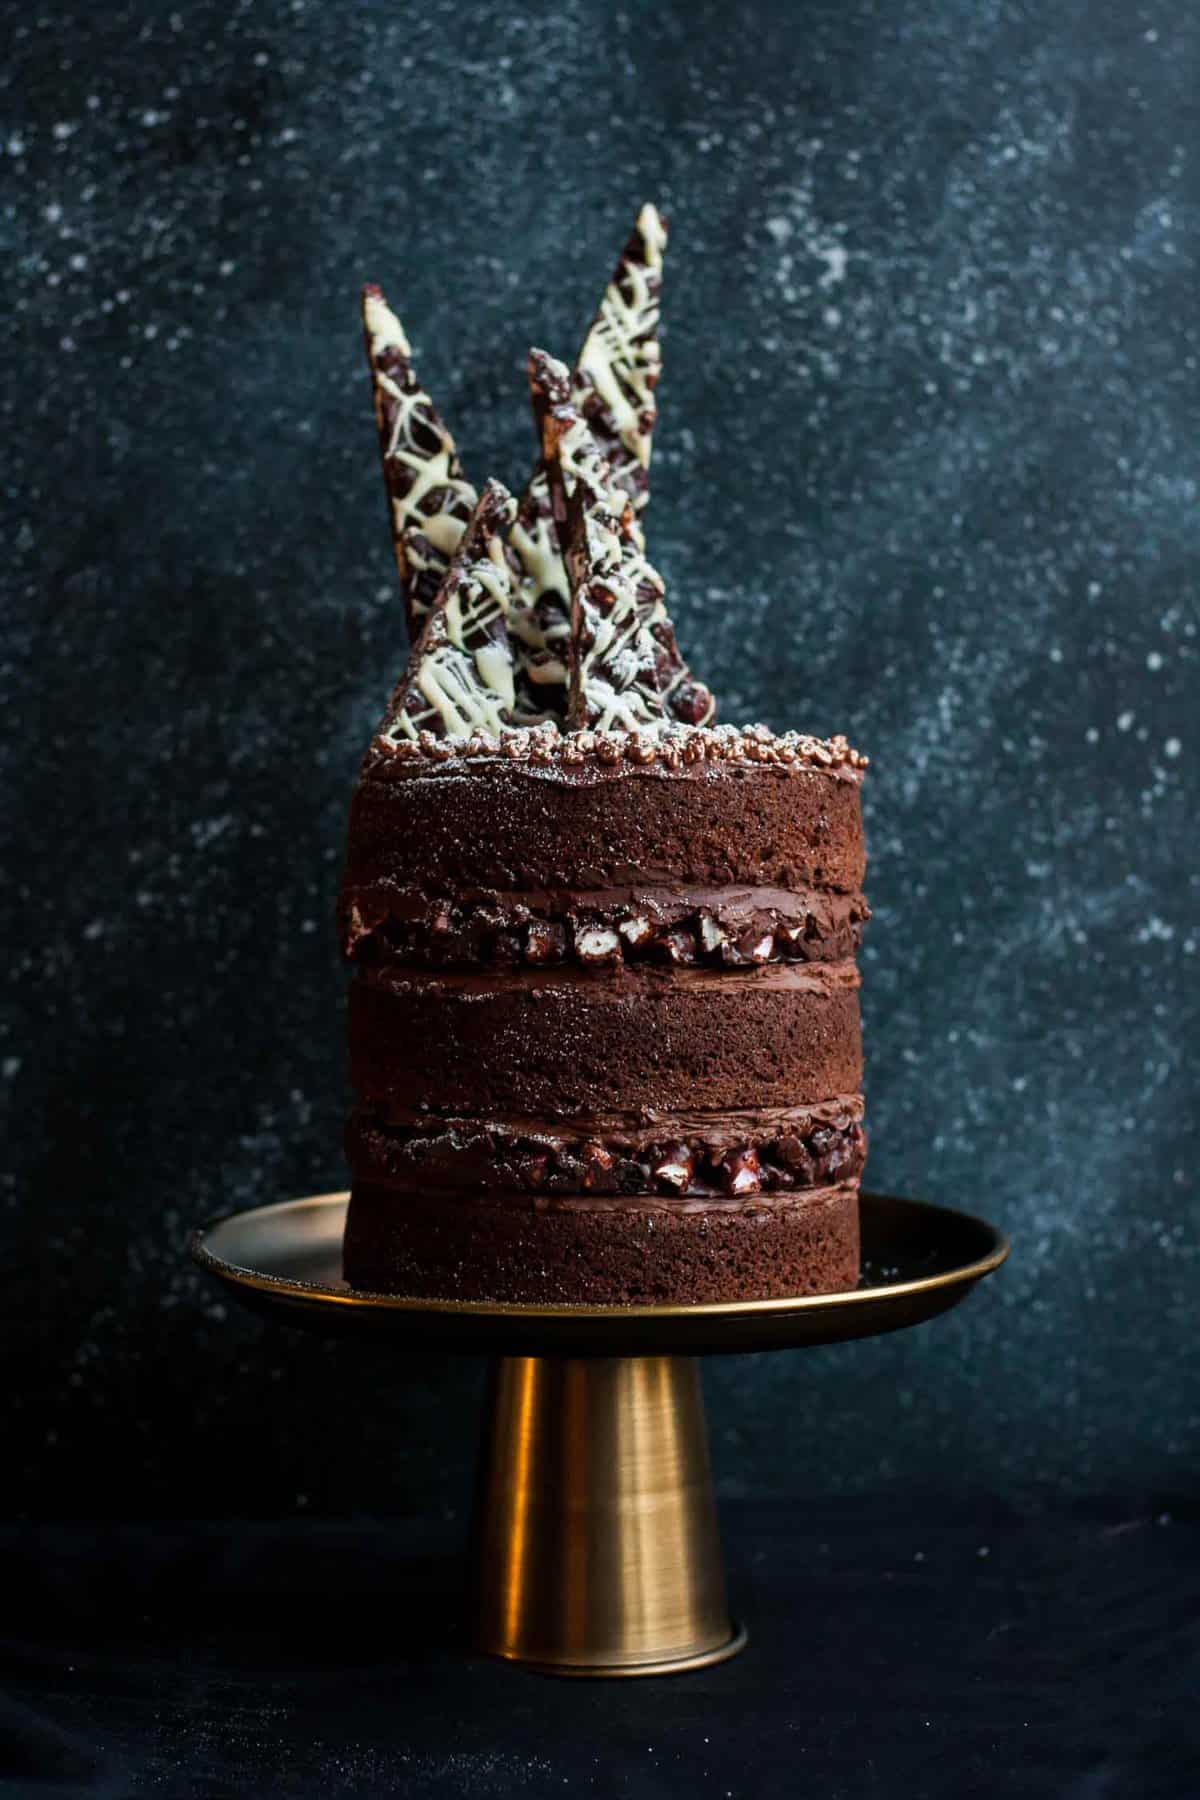 Rocky Road Layer Cake - a decadent layer cake combining chocolate sponge, rich ganache and festive rocky road! | eatloveeats.com